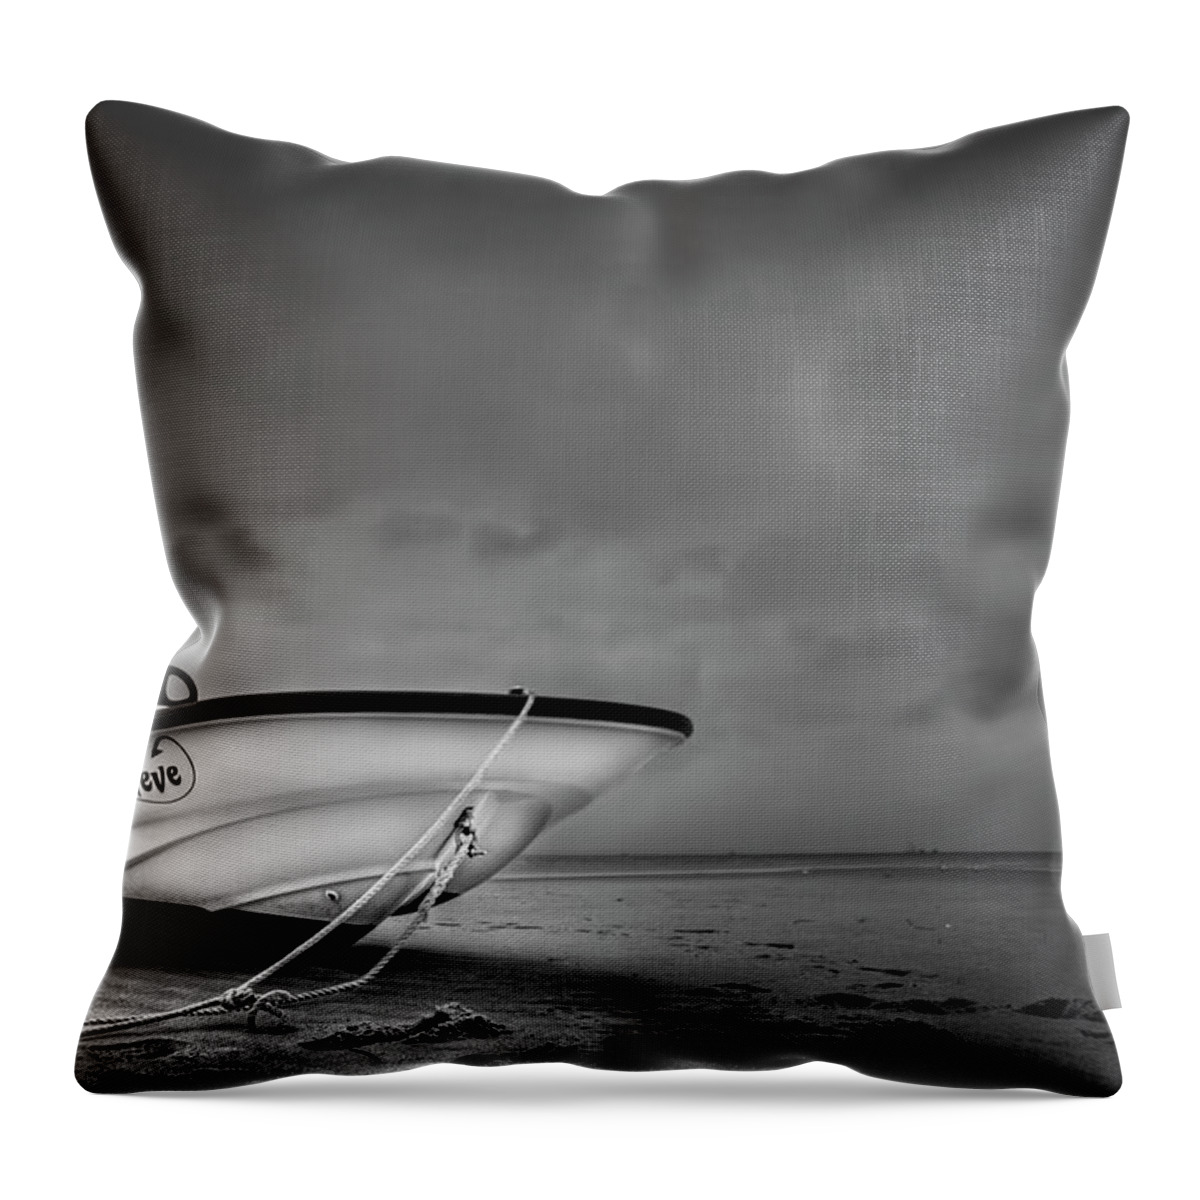 Boat Throw Pillow featuring the photograph Just Believe by Evelina Kremsdorf